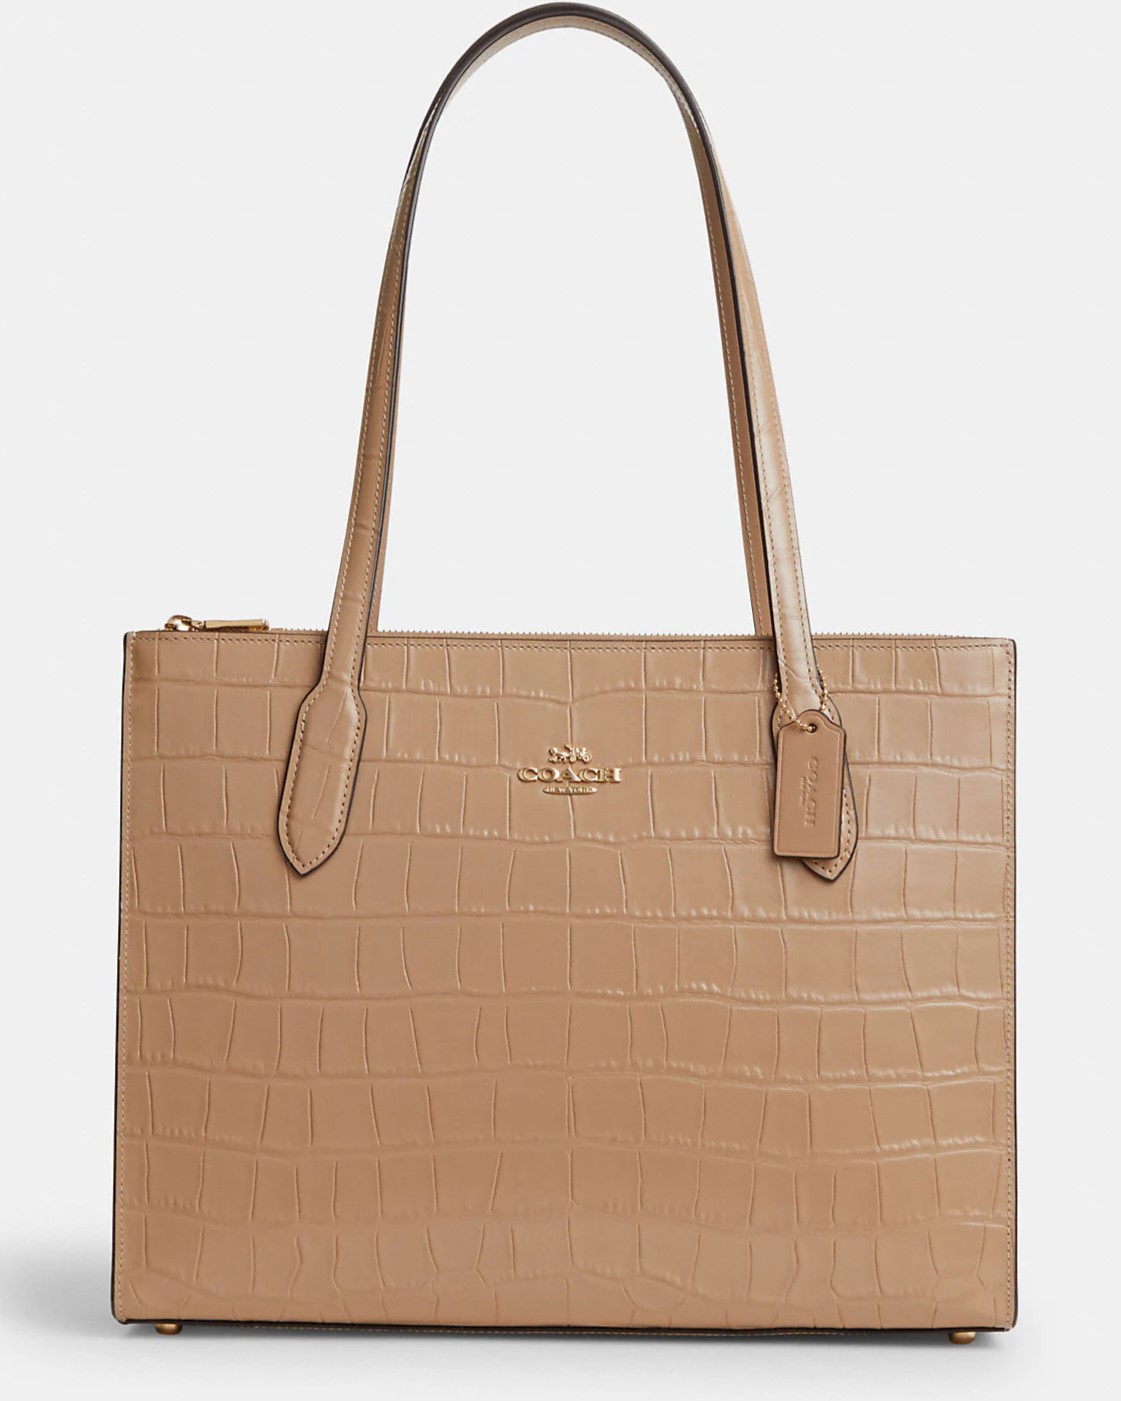 TÚI XÁCH DA LÁNG COACH NỮ NINA TOTE CROCODILE-EMBOSSED LEATHER AND SMOOTH LEATHER BAG IN GOLD TAUPE CL654 1